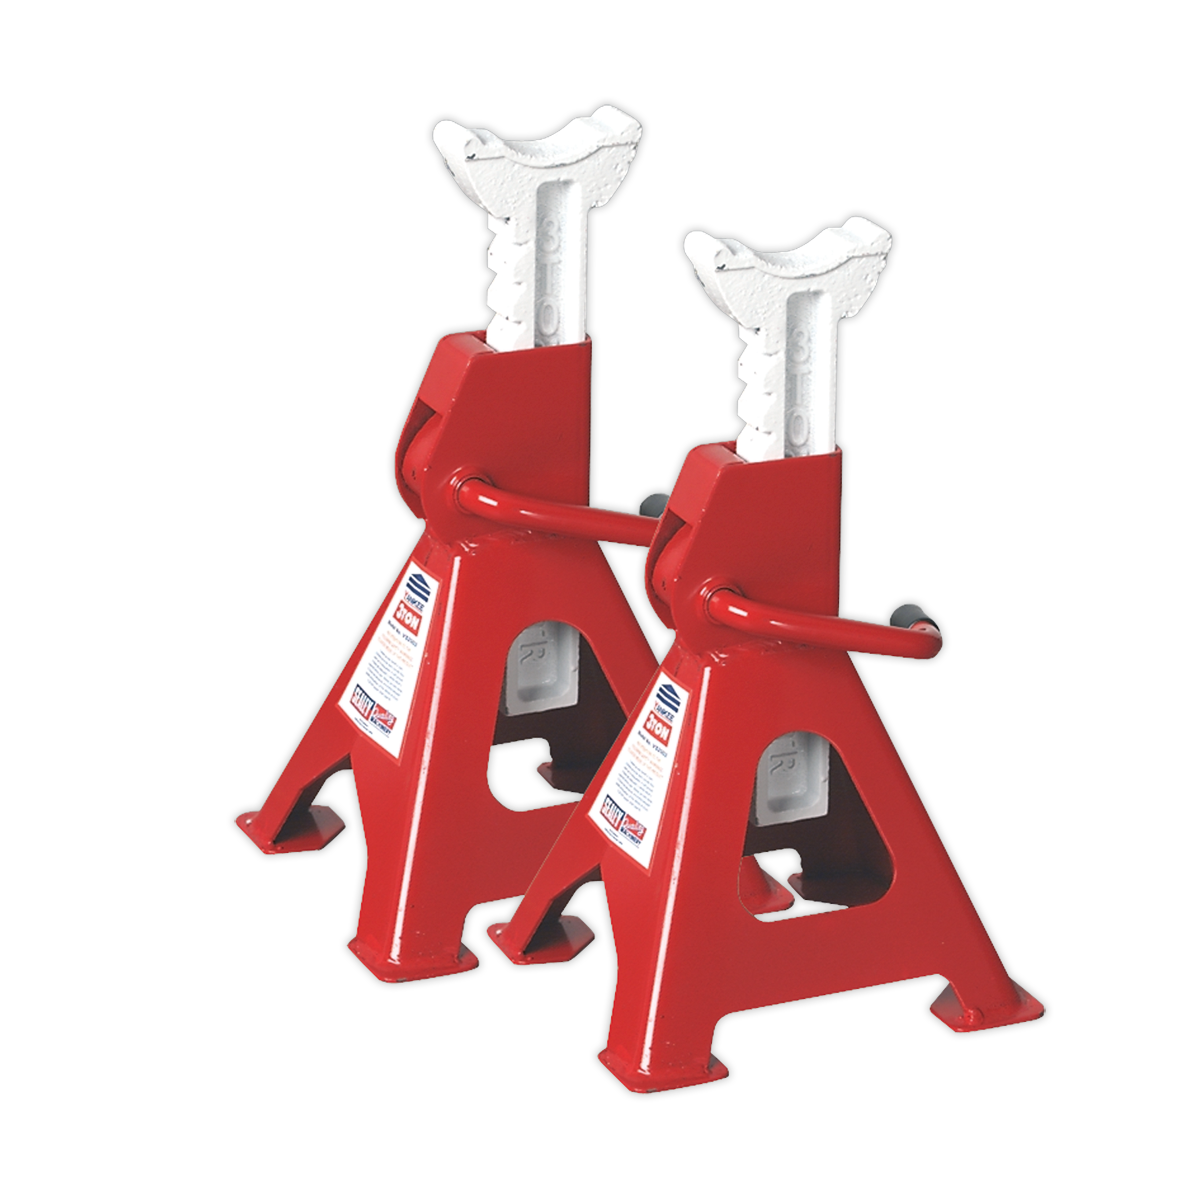 SEALEY - VS2003 Axle Stands (Pair) 3tonne Capacity per Stand Ratchet Type